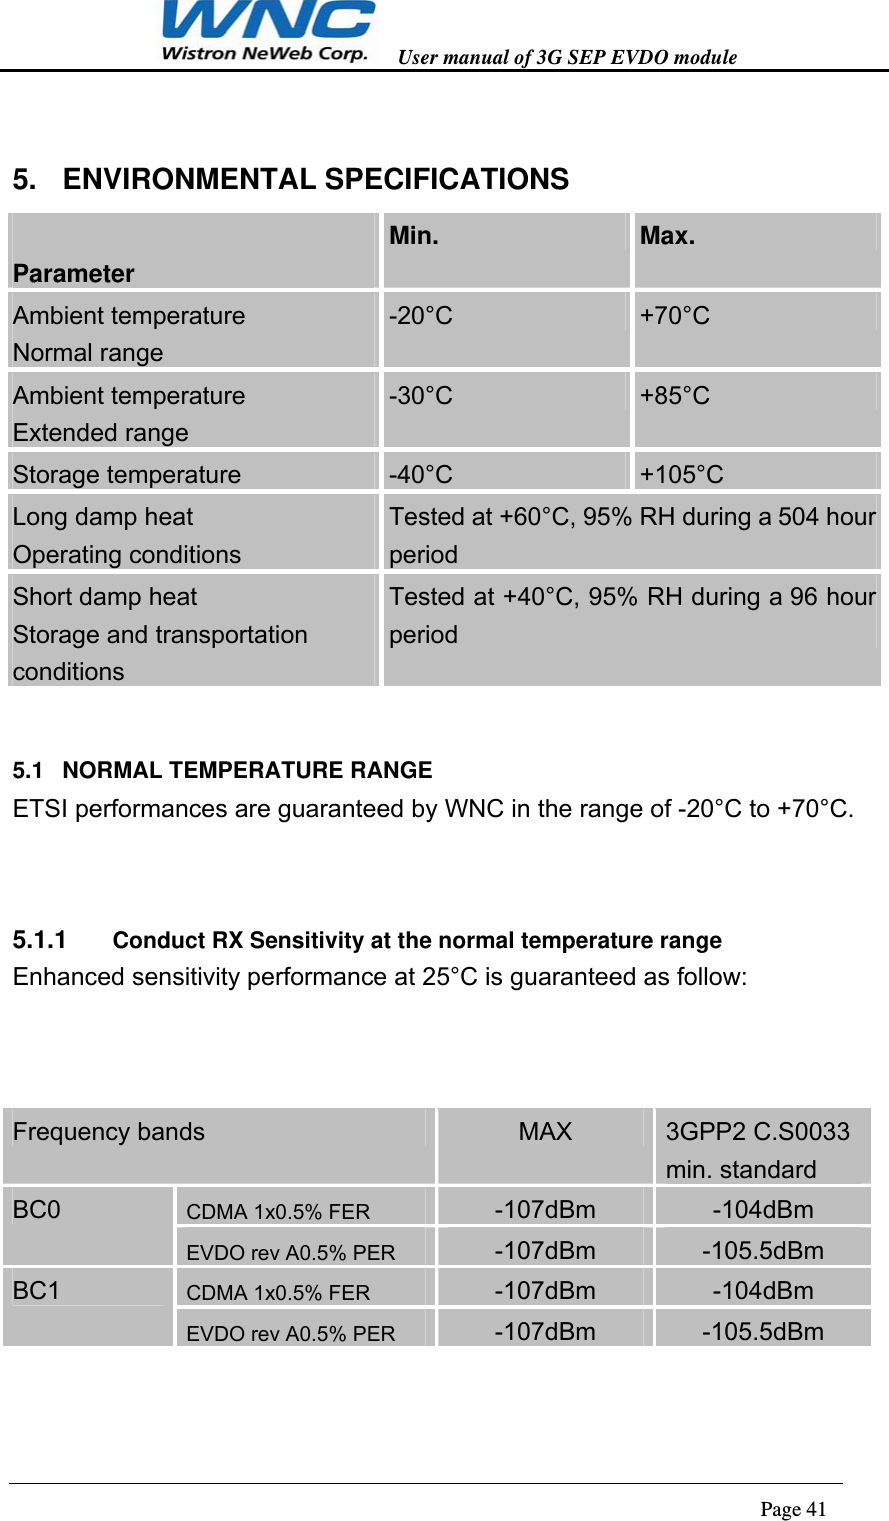   User manual of 3G SEP EVDO module                                                                      Page 41  5. ENVIRONMENTAL SPECIFICATIONS  Parameter Min.  Max. Ambient temperature Normal range -20°C  +70°C Ambient temperature Extended range -30°C  +85°C Storage temperature  -40°C  +105°C Long damp heat Operating conditions Tested at +60°C, 95% RH during a 504 hourperiod Short damp heat Storage and transportation conditions Tested at +40°C, 95% RH during a 96 hourperiod 5.1  NORMAL TEMPERATURE RANGE ETSI performances are guaranteed by WNC in the range of -20°C to +70°C.  5.1.1  Conduct RX Sensitivity at the normal temperature range Enhanced sensitivity performance at 25°C is guaranteed as follow:      Frequency bands  MAX  3GPP2 C.S0033 min. standard BC0  CDMA 1x0.5% FER  -107dBm  -104dBm EVDO rev A0.5% PER  -107dBm  -105.5dBm BC1  CDMA 1x0.5% FER  -107dBm  -104dBm EVDO rev A0.5% PER  -107dBm  -105.5dBm   